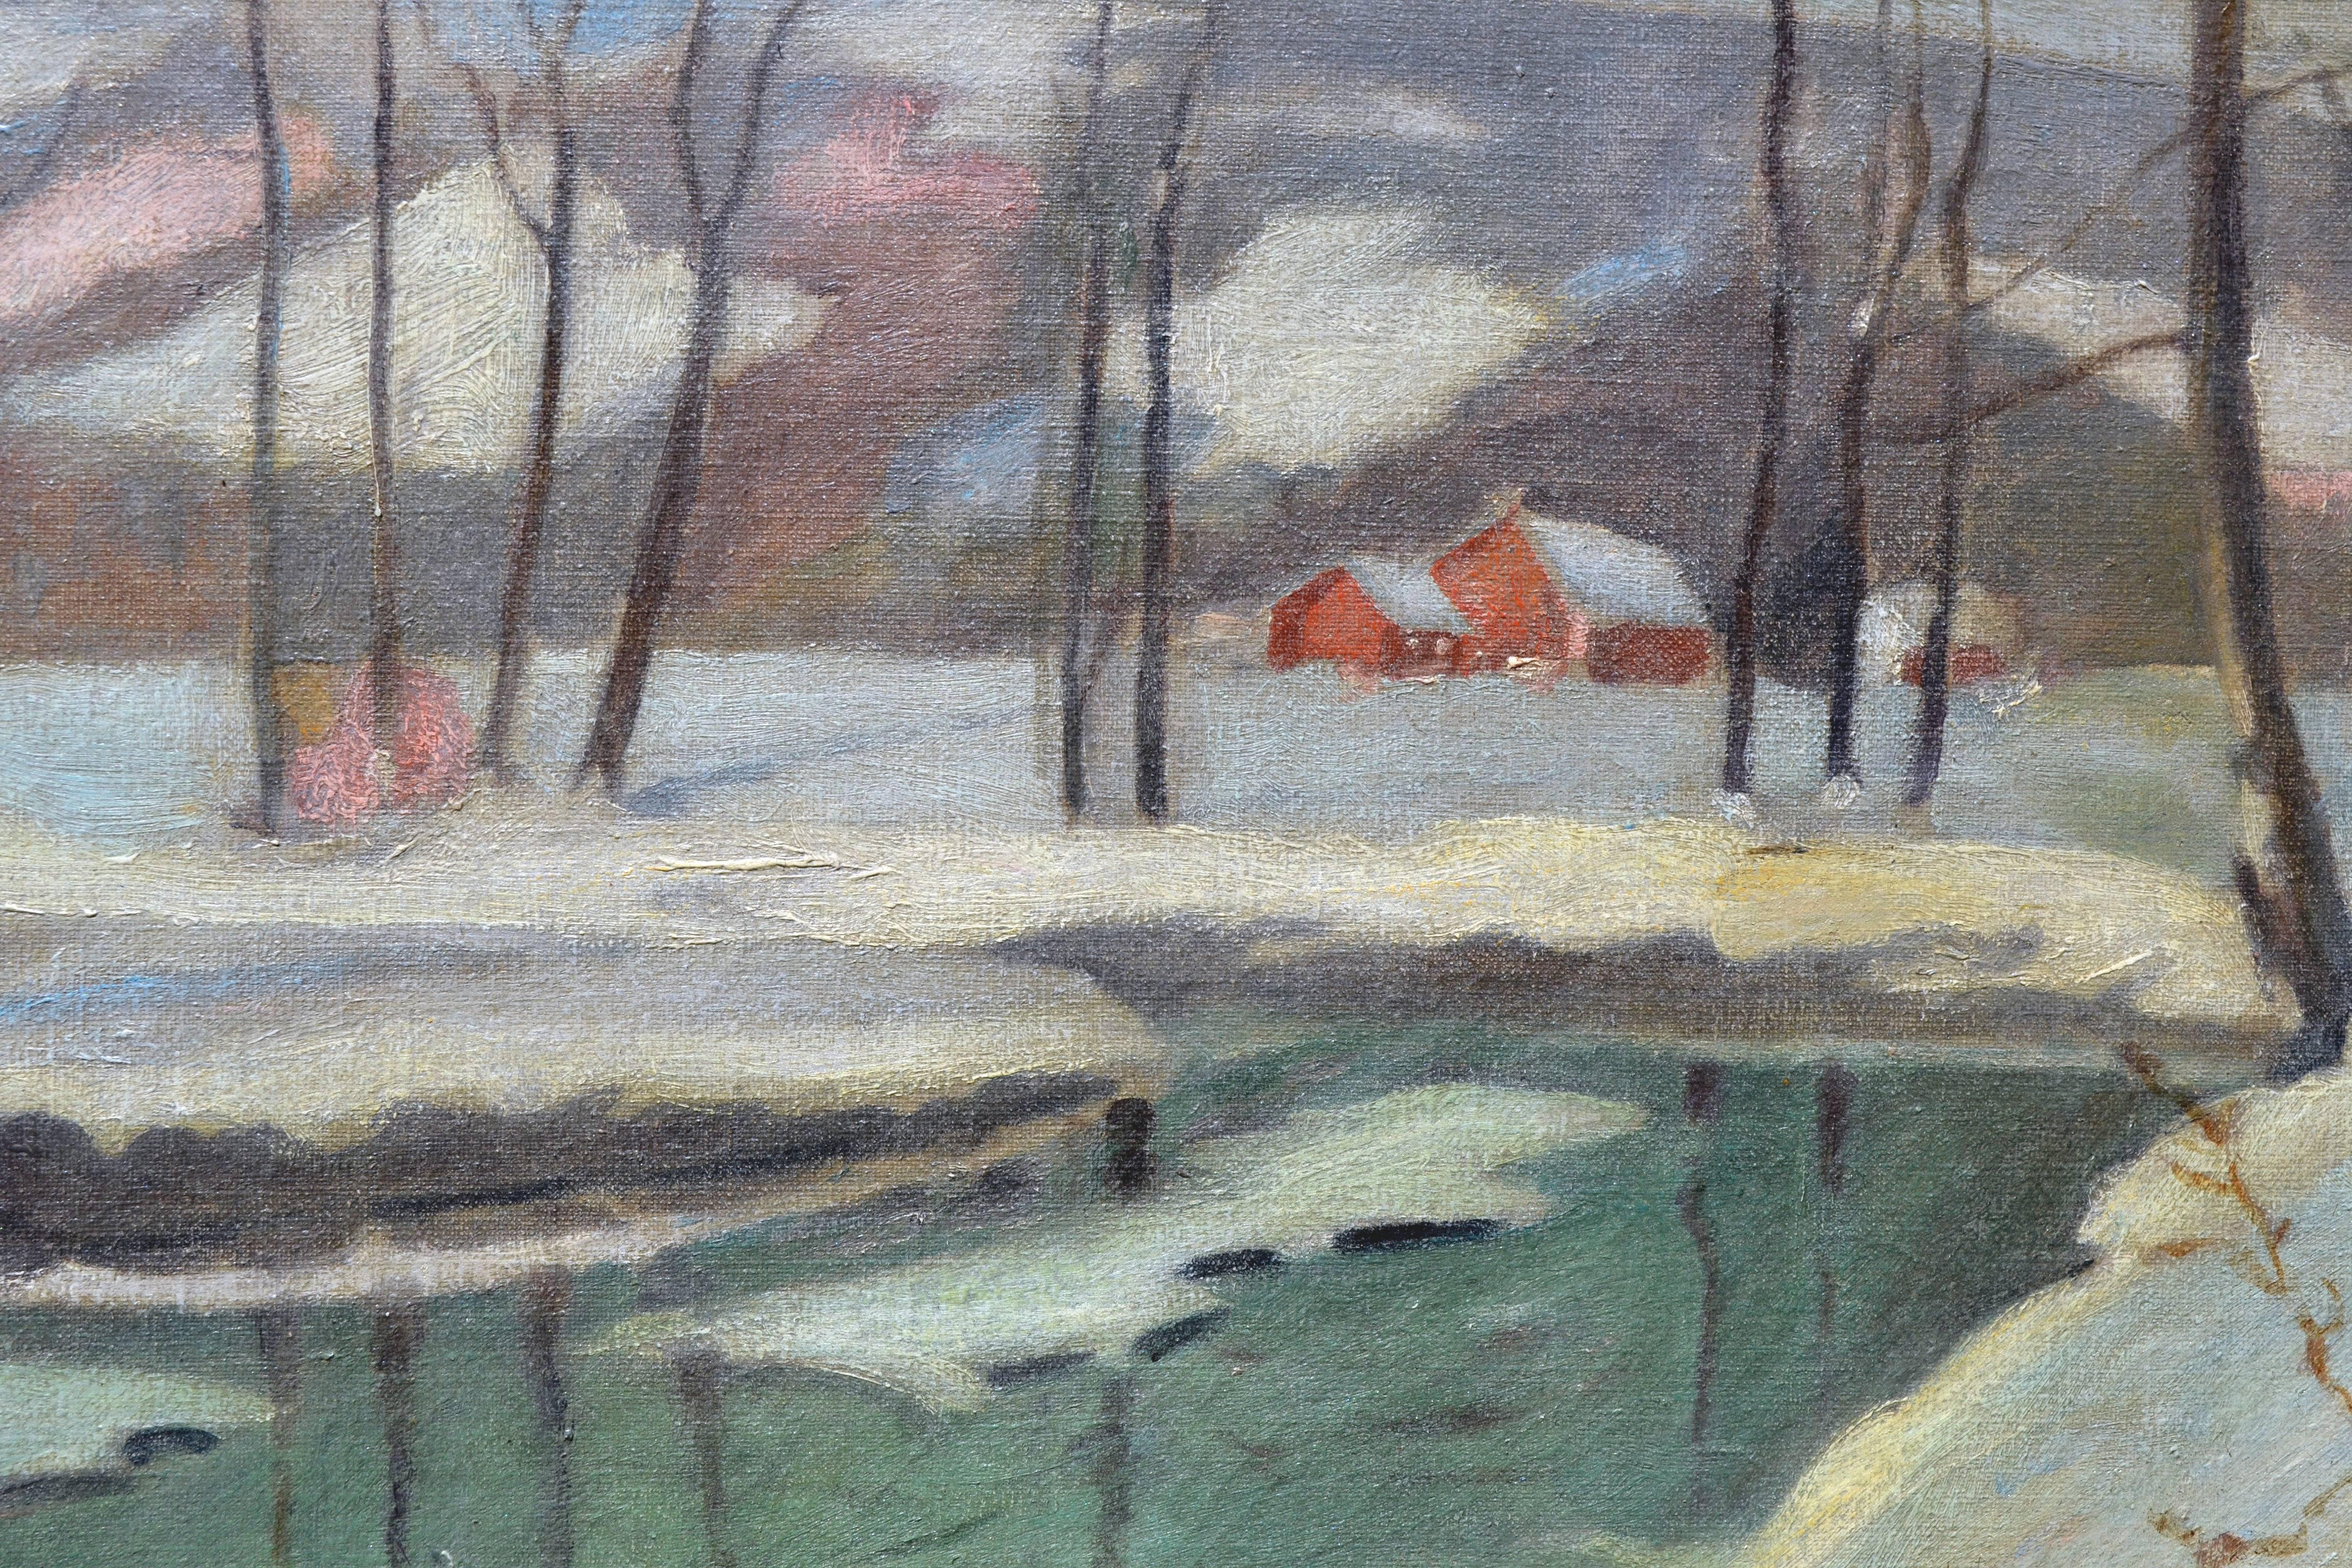 A Winter Scene - Snowy 1930's Landscape - Painting by Frederick R. Wagner